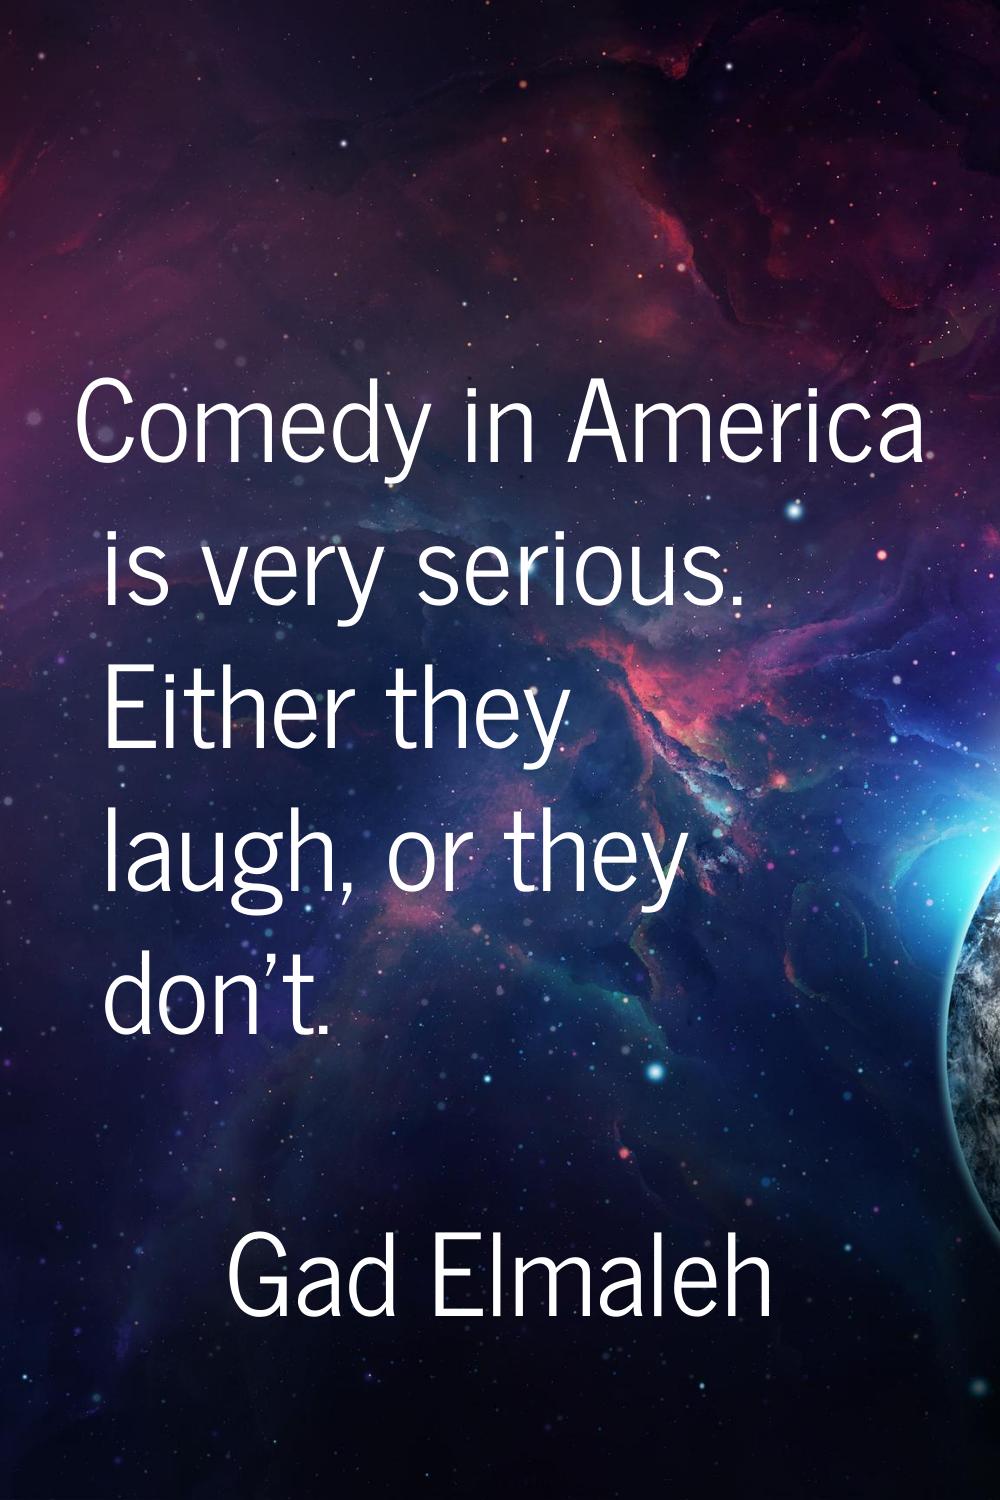 Comedy in America is very serious. Either they laugh, or they don't.